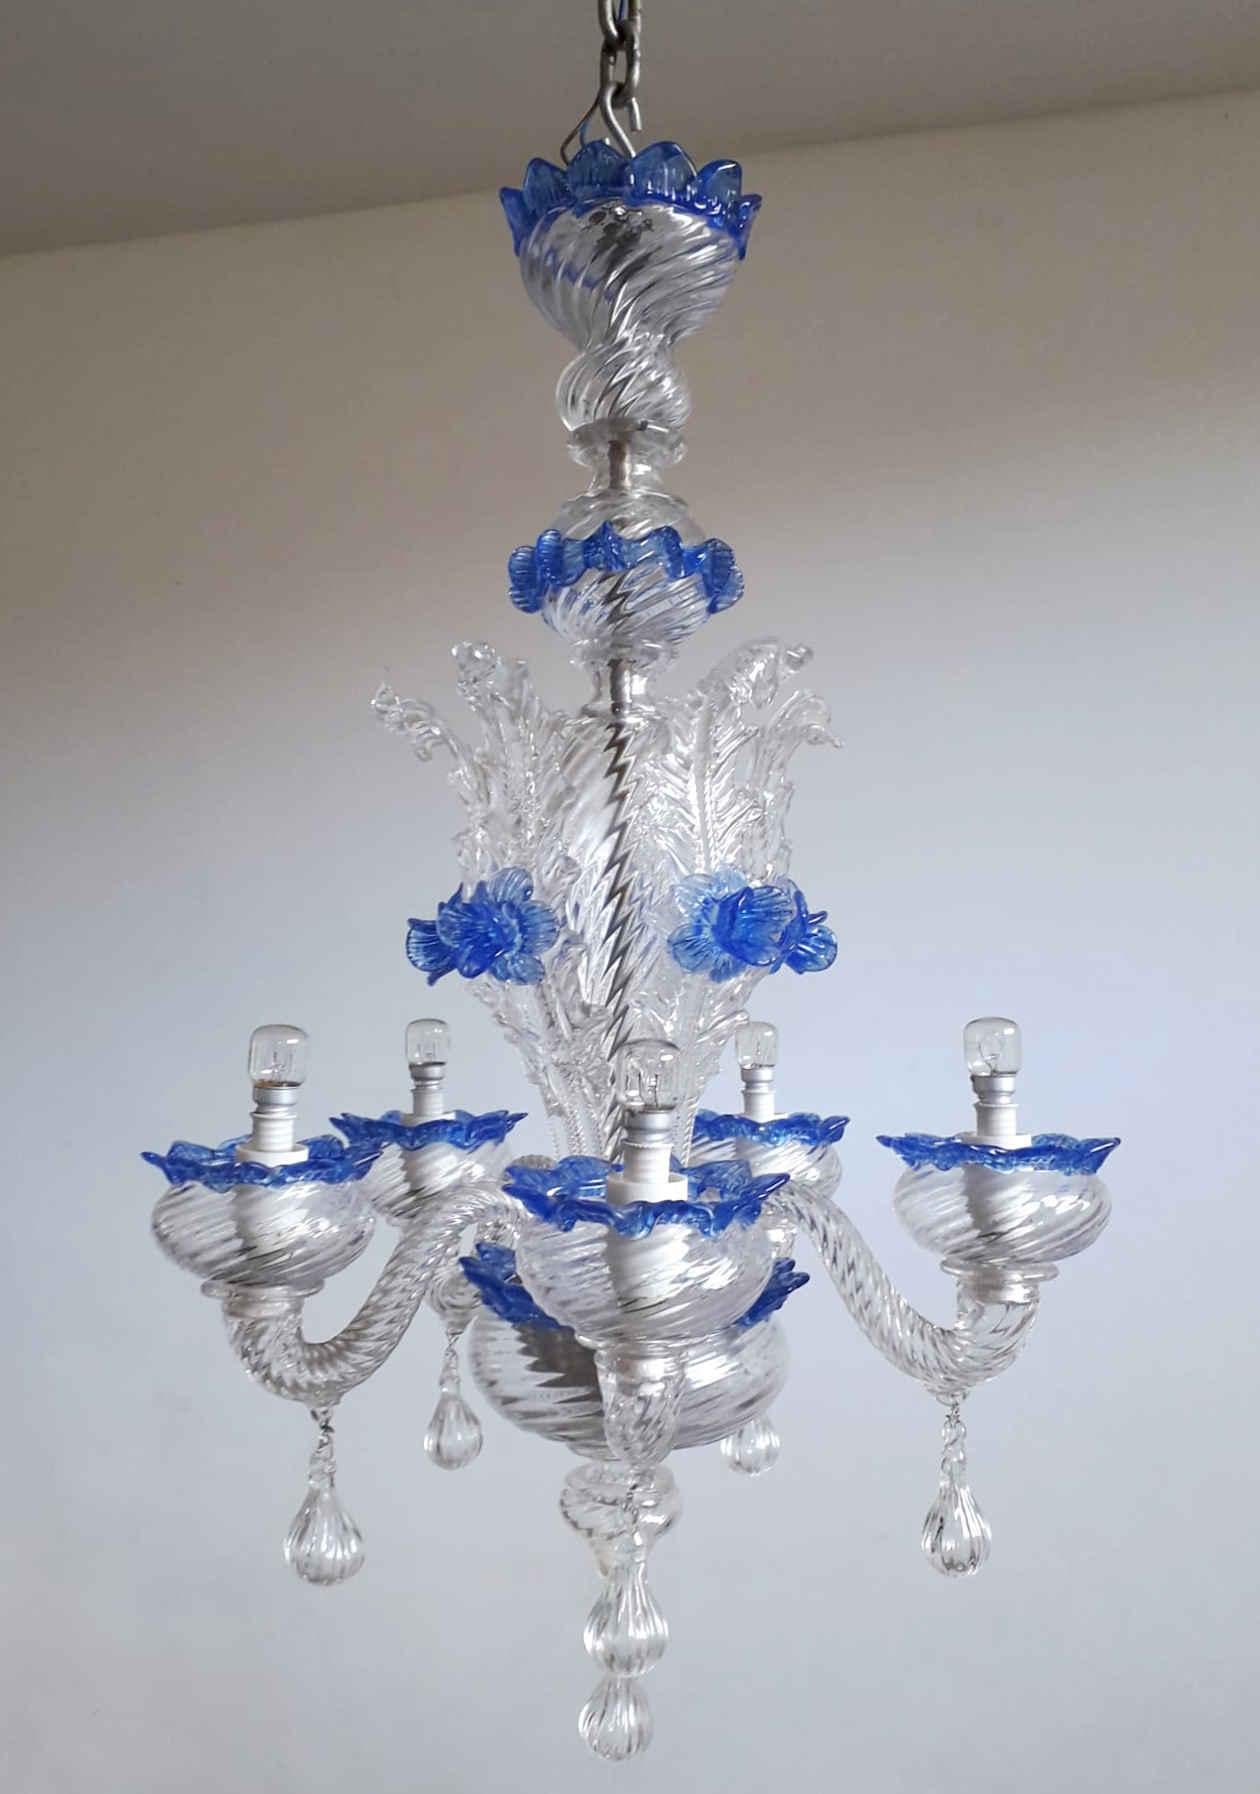 Ornate vintage Italian Murano chandelier with hand blown clear ribbed glass body, leaves and droplets, decorated with blue flowers and accents / Made in Italy circa 1950s
Diameter 16 inches, height 25 inches
5 lights / E12 or E14 type / max 40W